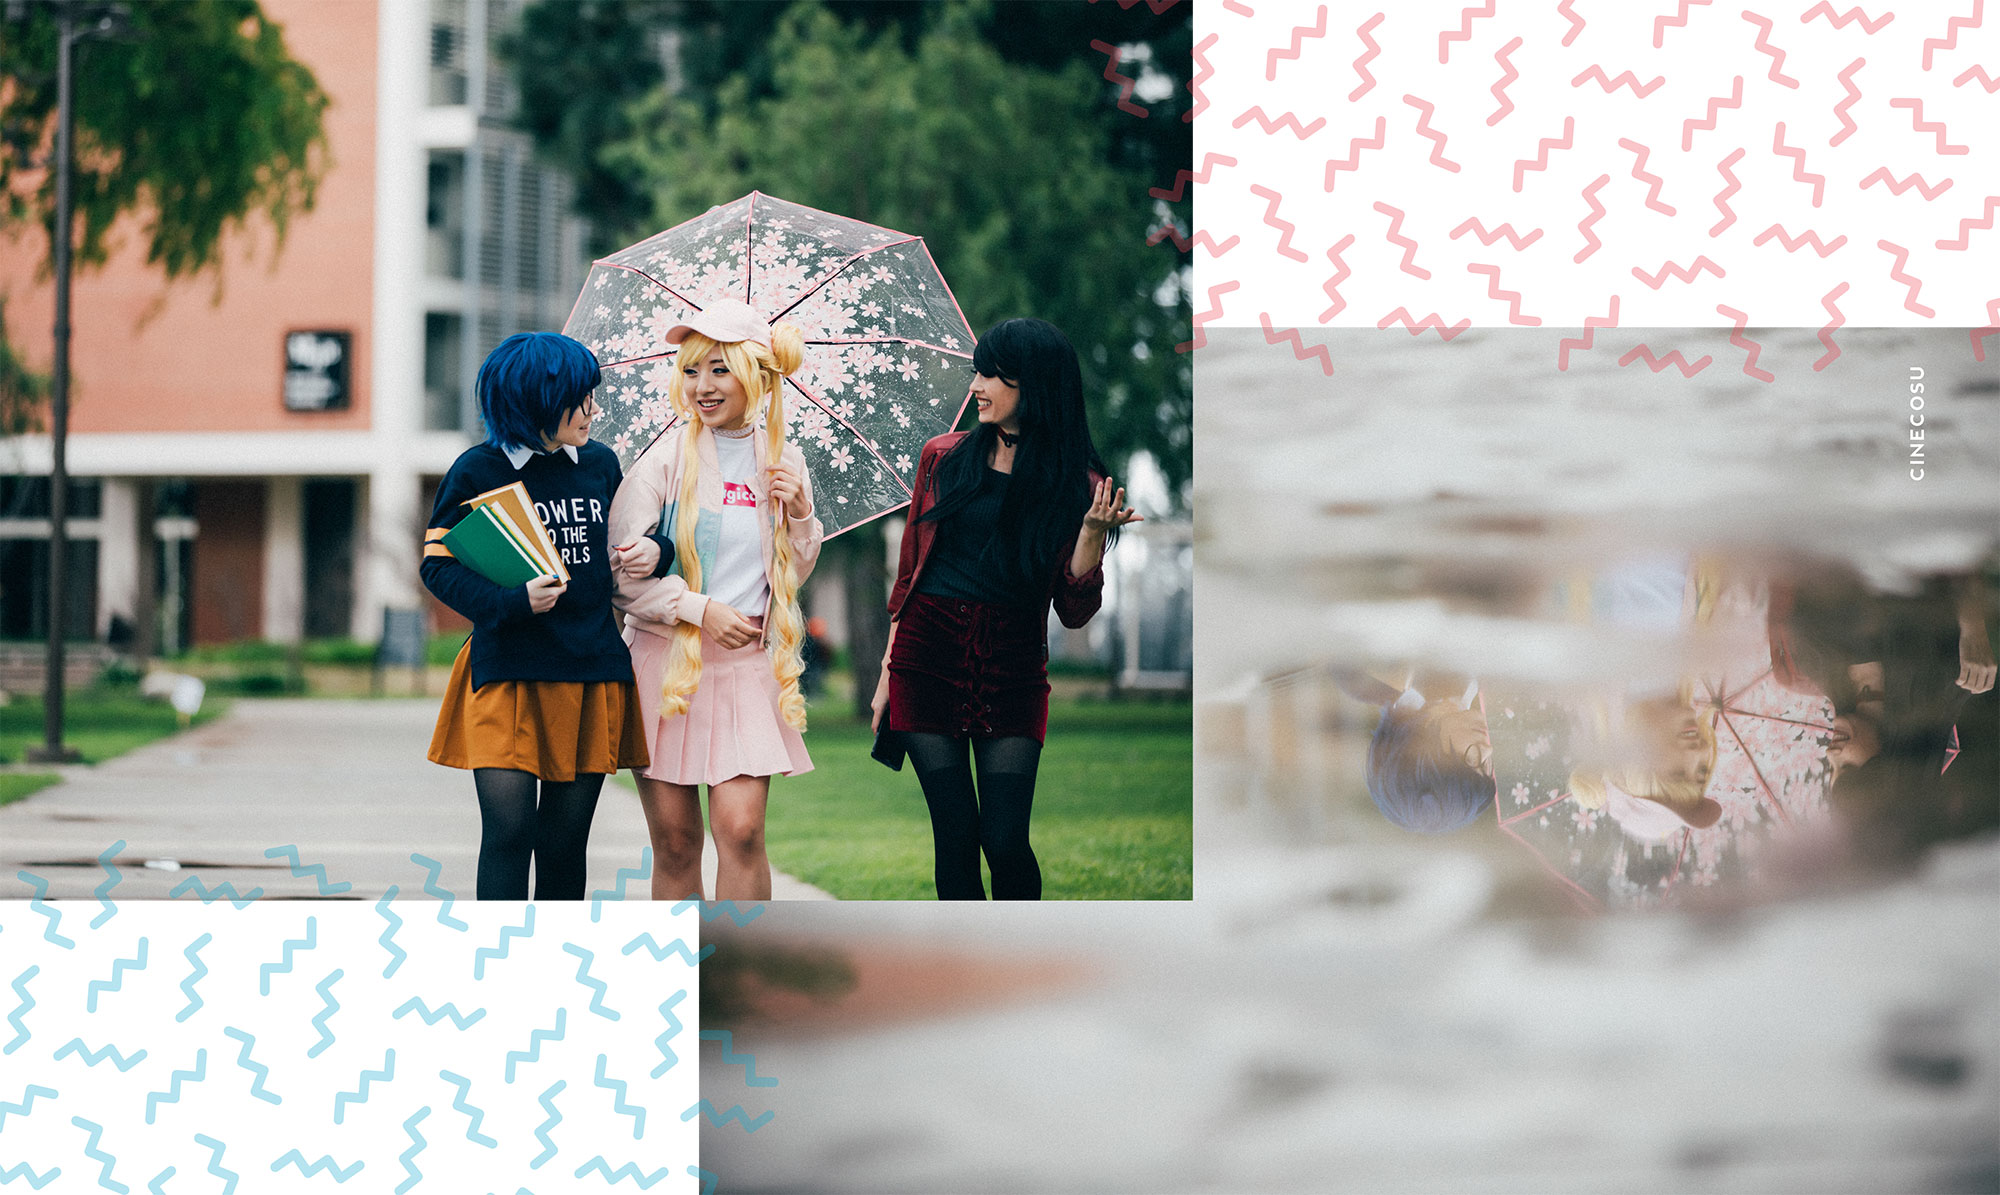 Sailor Moon Cosplay Is The Height Of ’90s Fashion